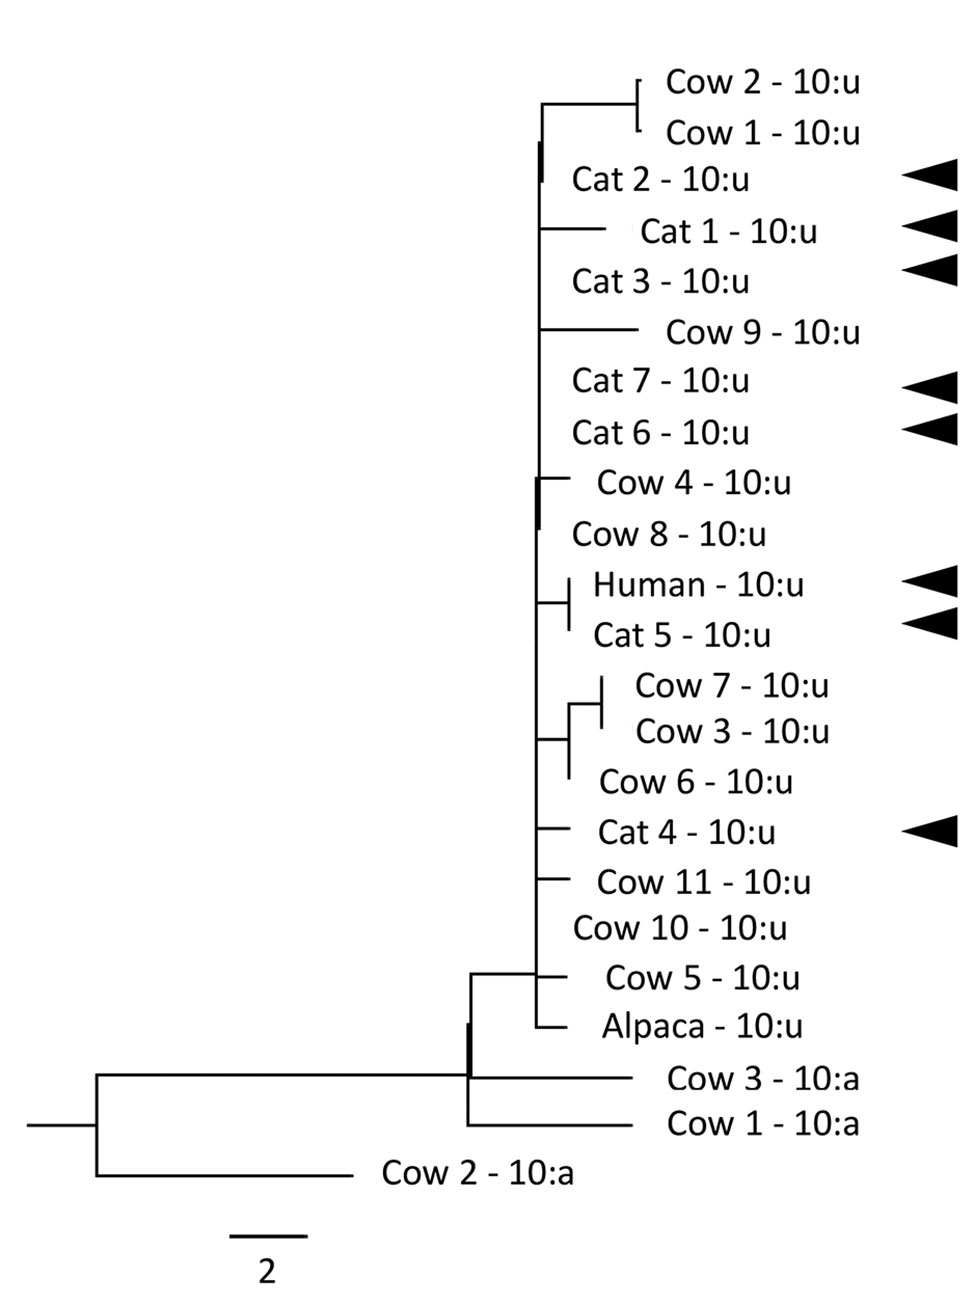 Whole-genome sequencing phylogenetic relationship of genotype 10:u isolates of Mycobacterium bovis from 1 human, 7 cats, 11 cattle, and 1 alpaca, and 10:a isolates from 3 cattle (maximum-likelihood tree of all single-nucleotide polymorphisms [SNPs]). Cat and human isolates are indicated by solid arrowheads. Heat-killed cultures were sequenced by using a MiSeq Sequencer (Illumina, https://www.illumina.com), and reads were mapped by using reference strain AF2122. The average coverage ranged from 2